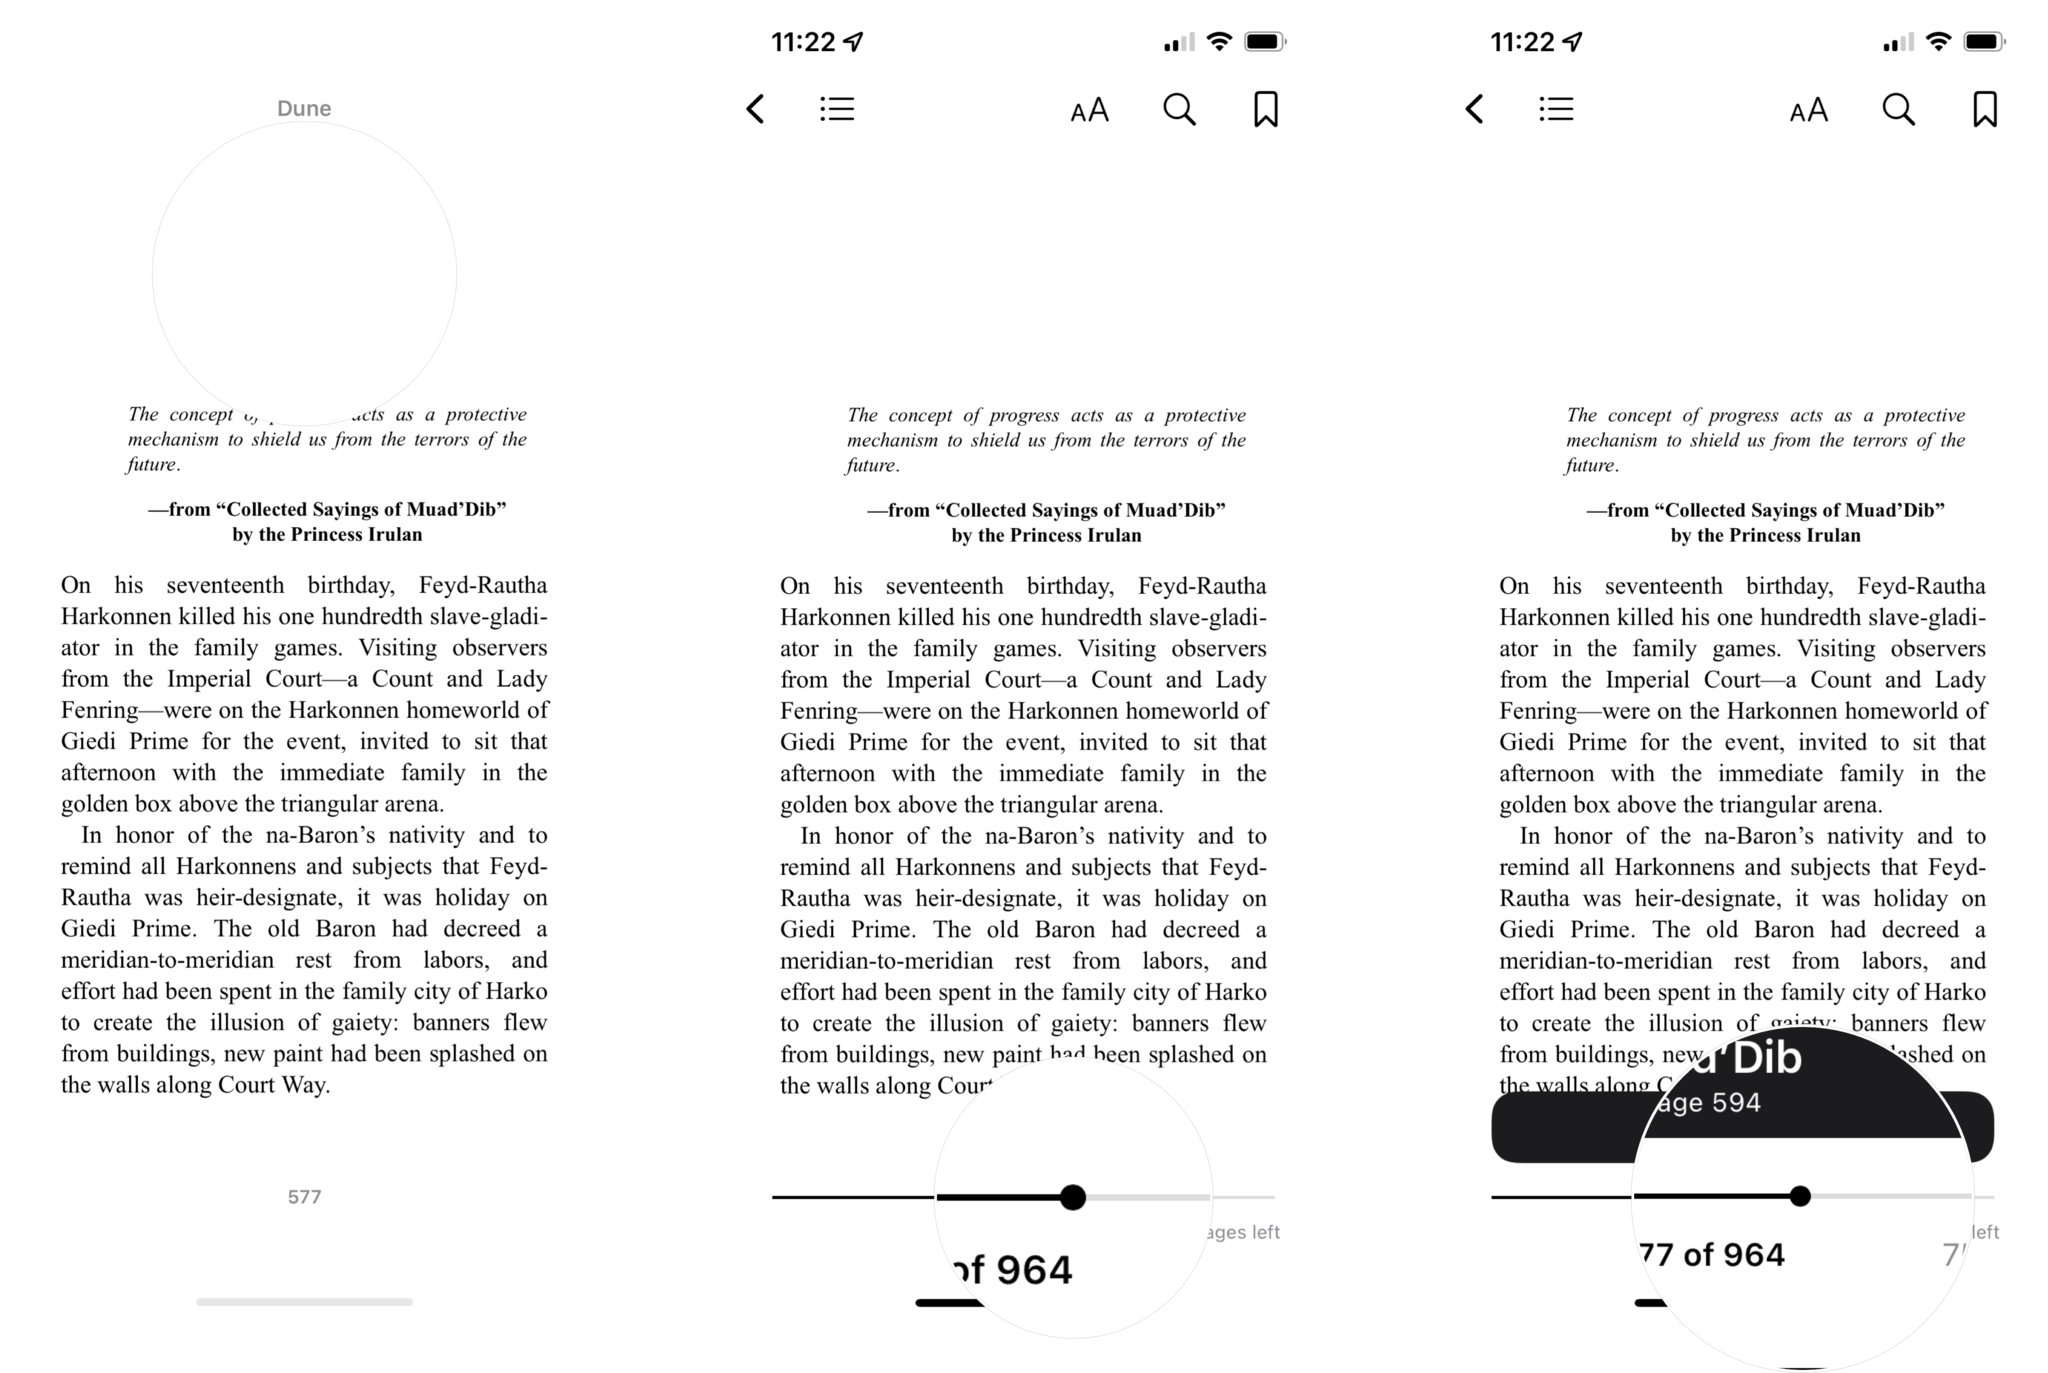 How to quickly scan through a book in Apple Books: Tap a blank part of the page to bring up the controls, touch and hold the dot on the scroll bar, drag left or right to move through pages